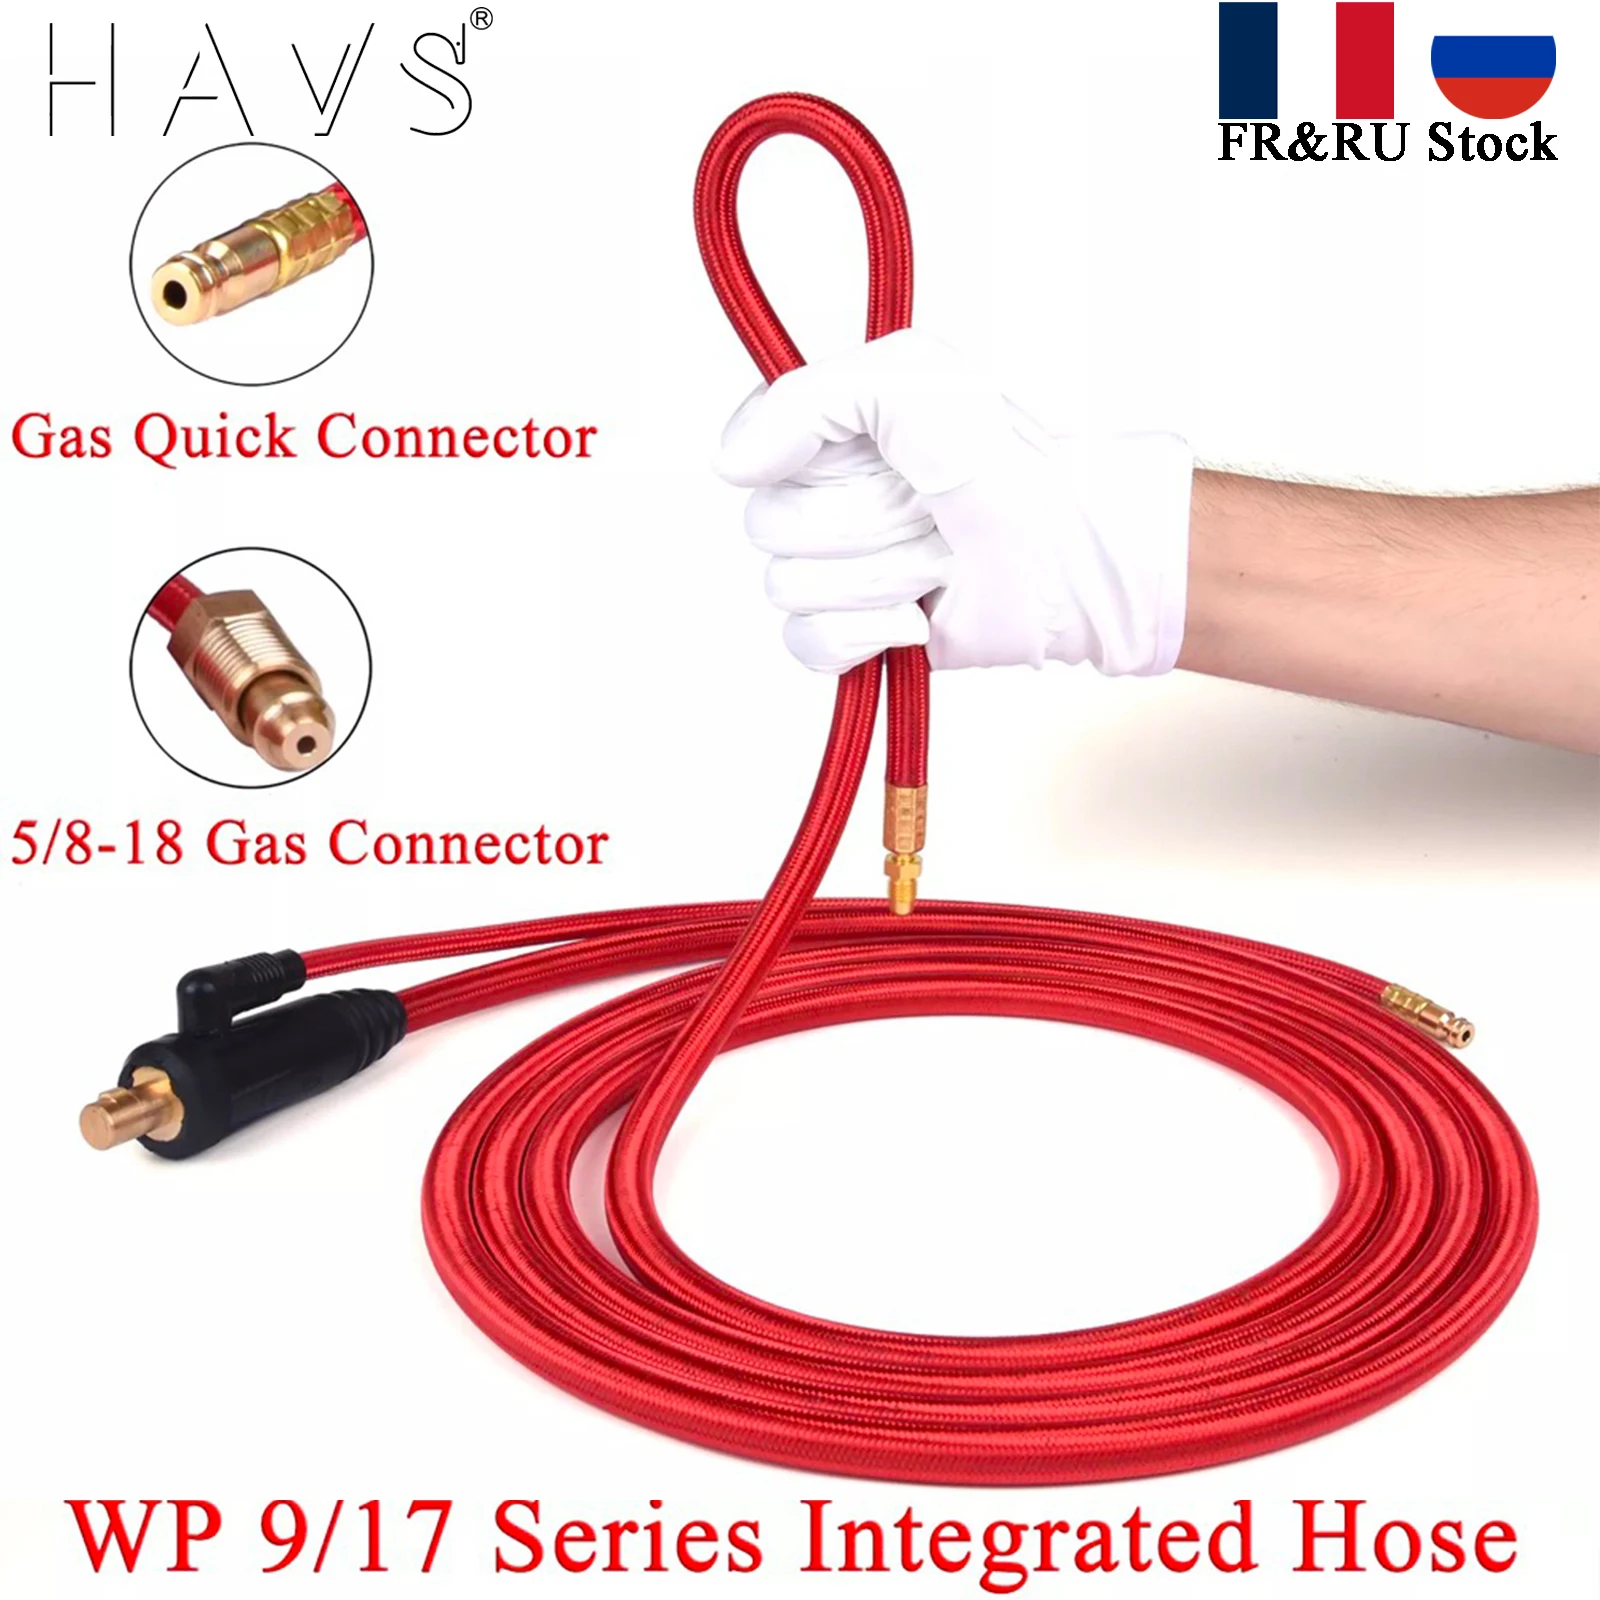 3.8m/7.6m WP9 WP17 TIG Welding Torch Gas-Electric Integrated Red Hose Cable Wires 5/8 Quick Connector 35-50 Euro Connector